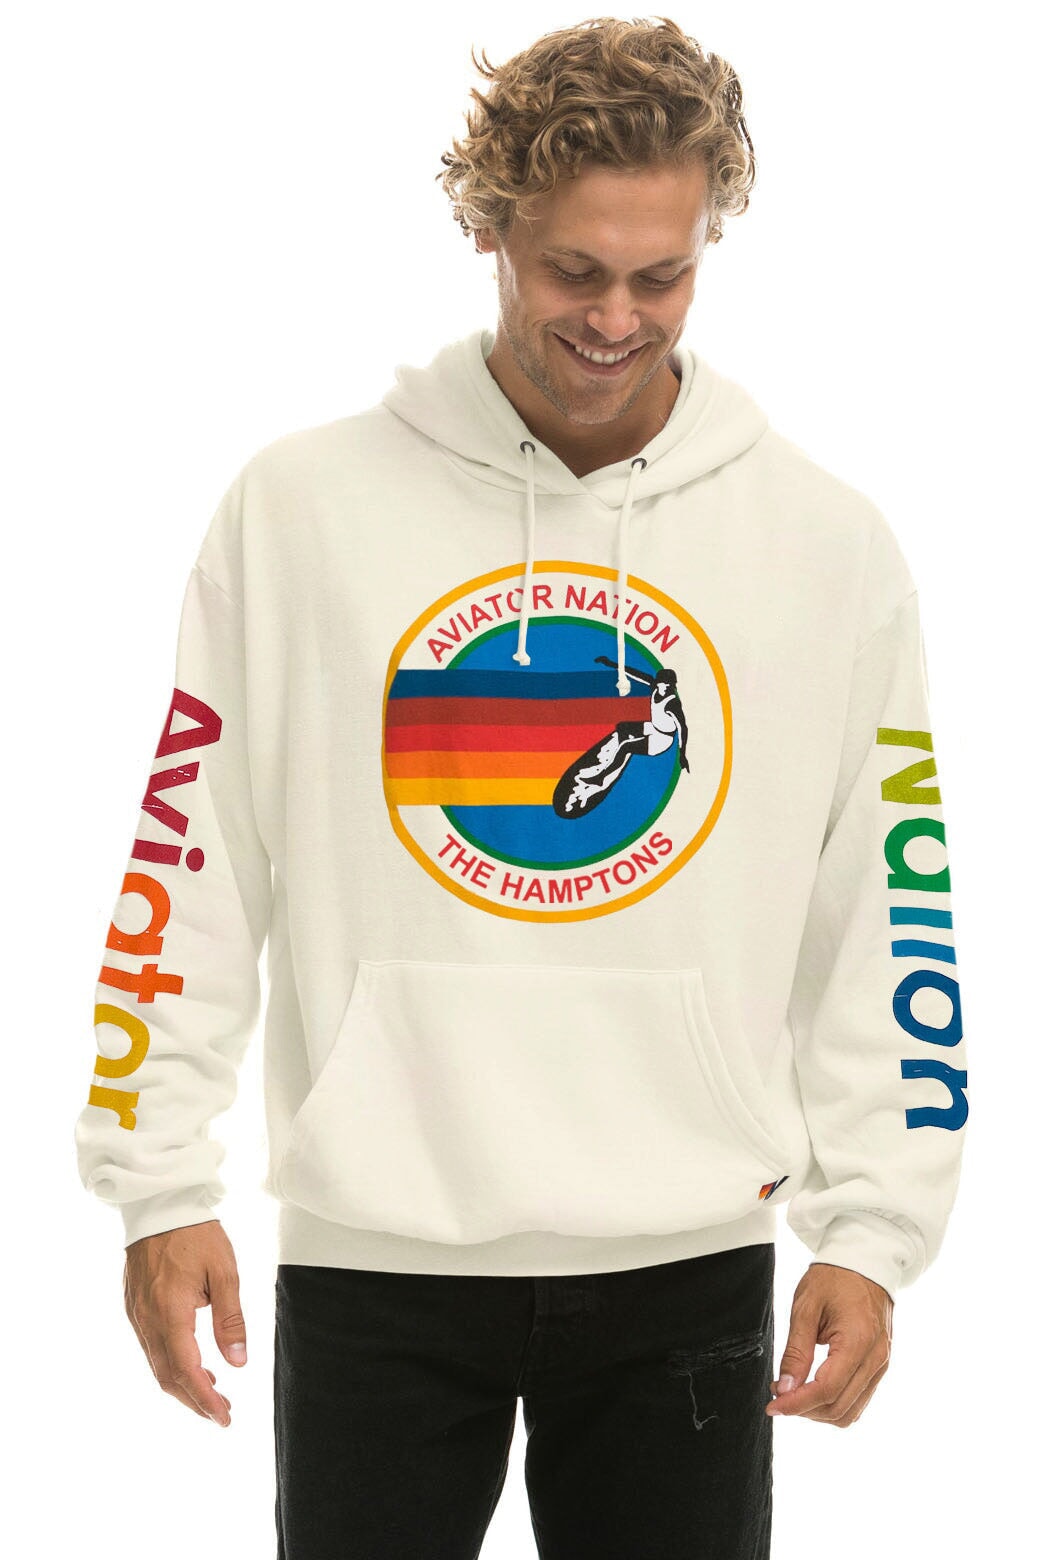 AVIATOR NATION HAMPTONS RELAXED PULLOVER HOODIE - VINTAGE WHITE Hoodie Aviator Nation 